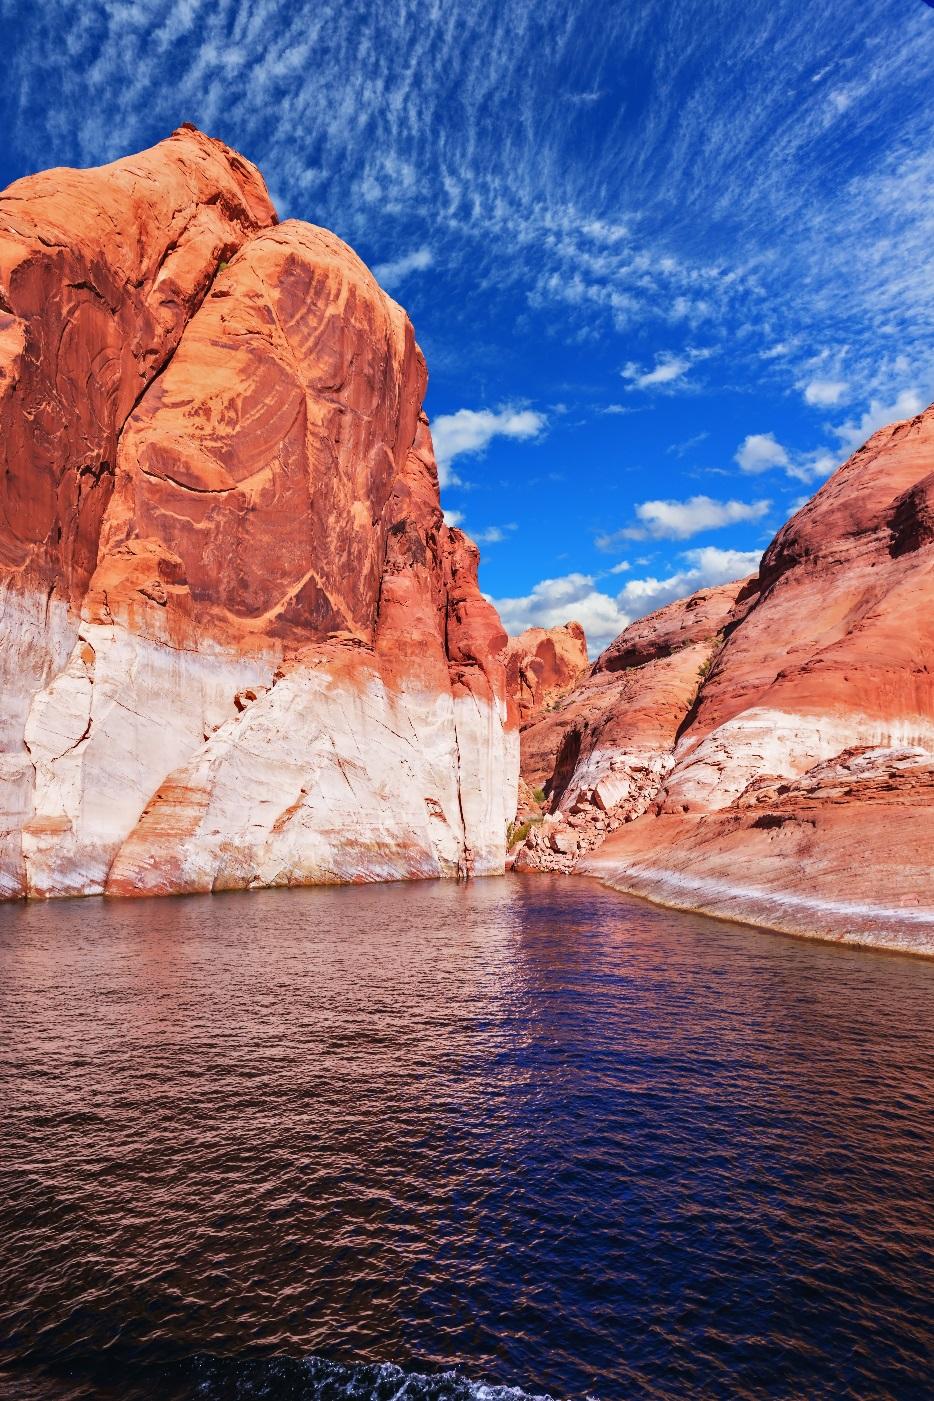 FACT: The Colorado River Basin covers about 246,000 square miles and